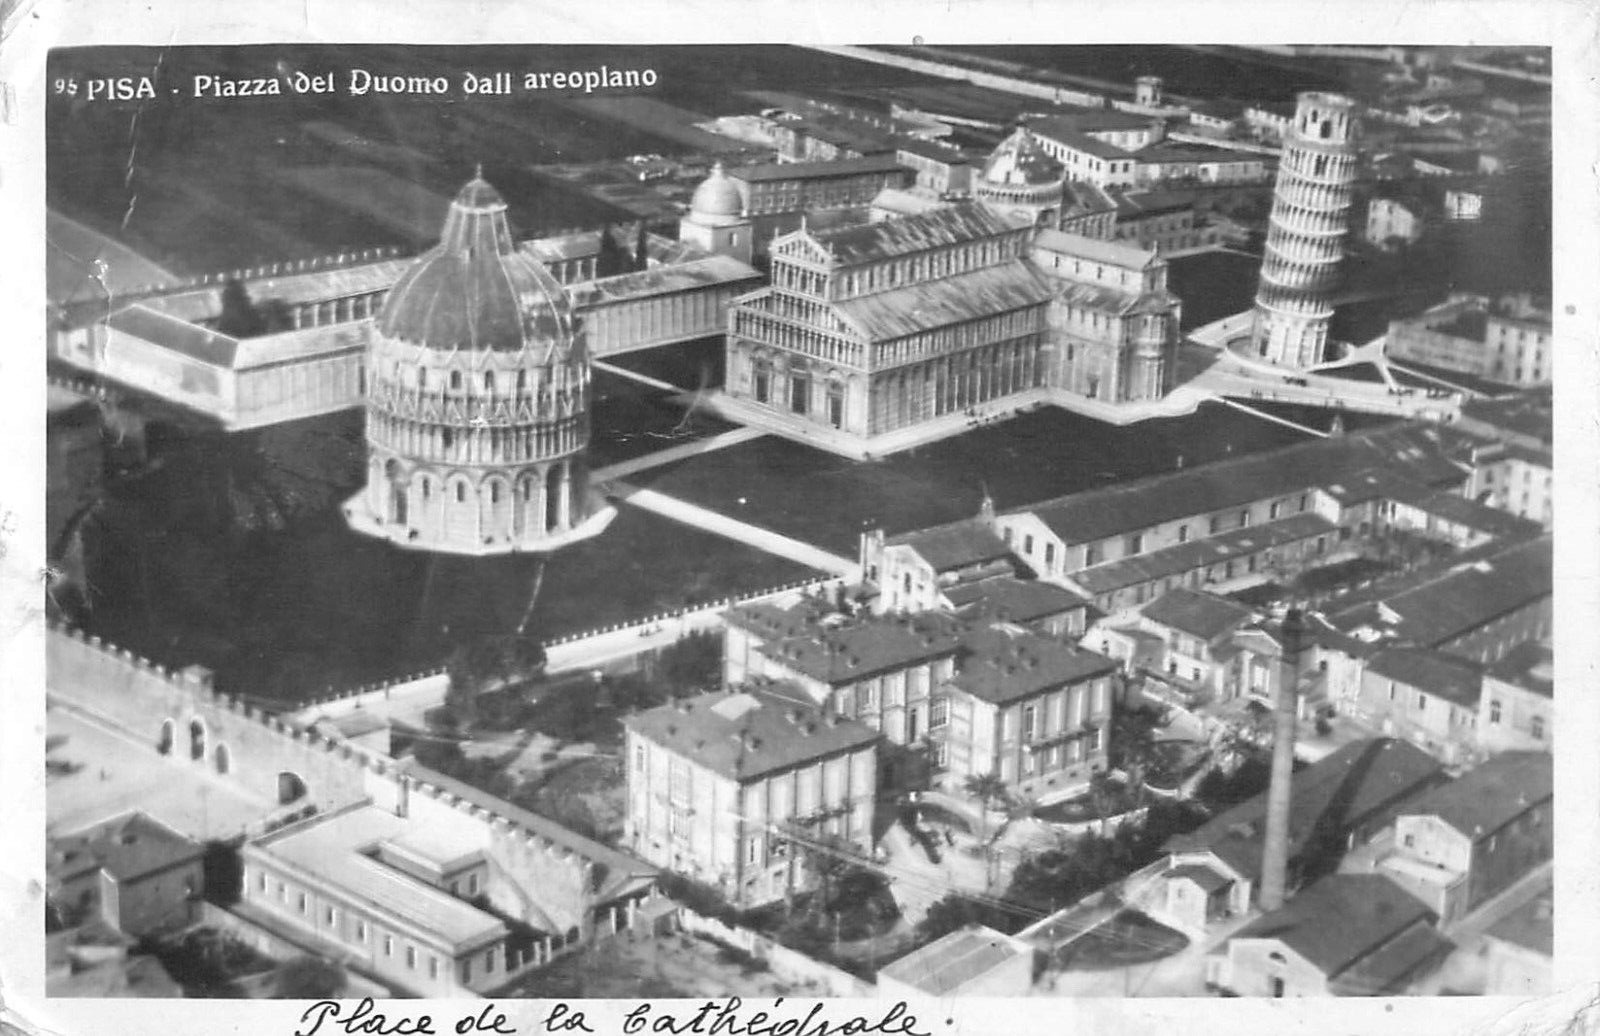 PISA-Aerial View Piazza del Duomo and Leaning Tower Vintage Real Photo Postcard